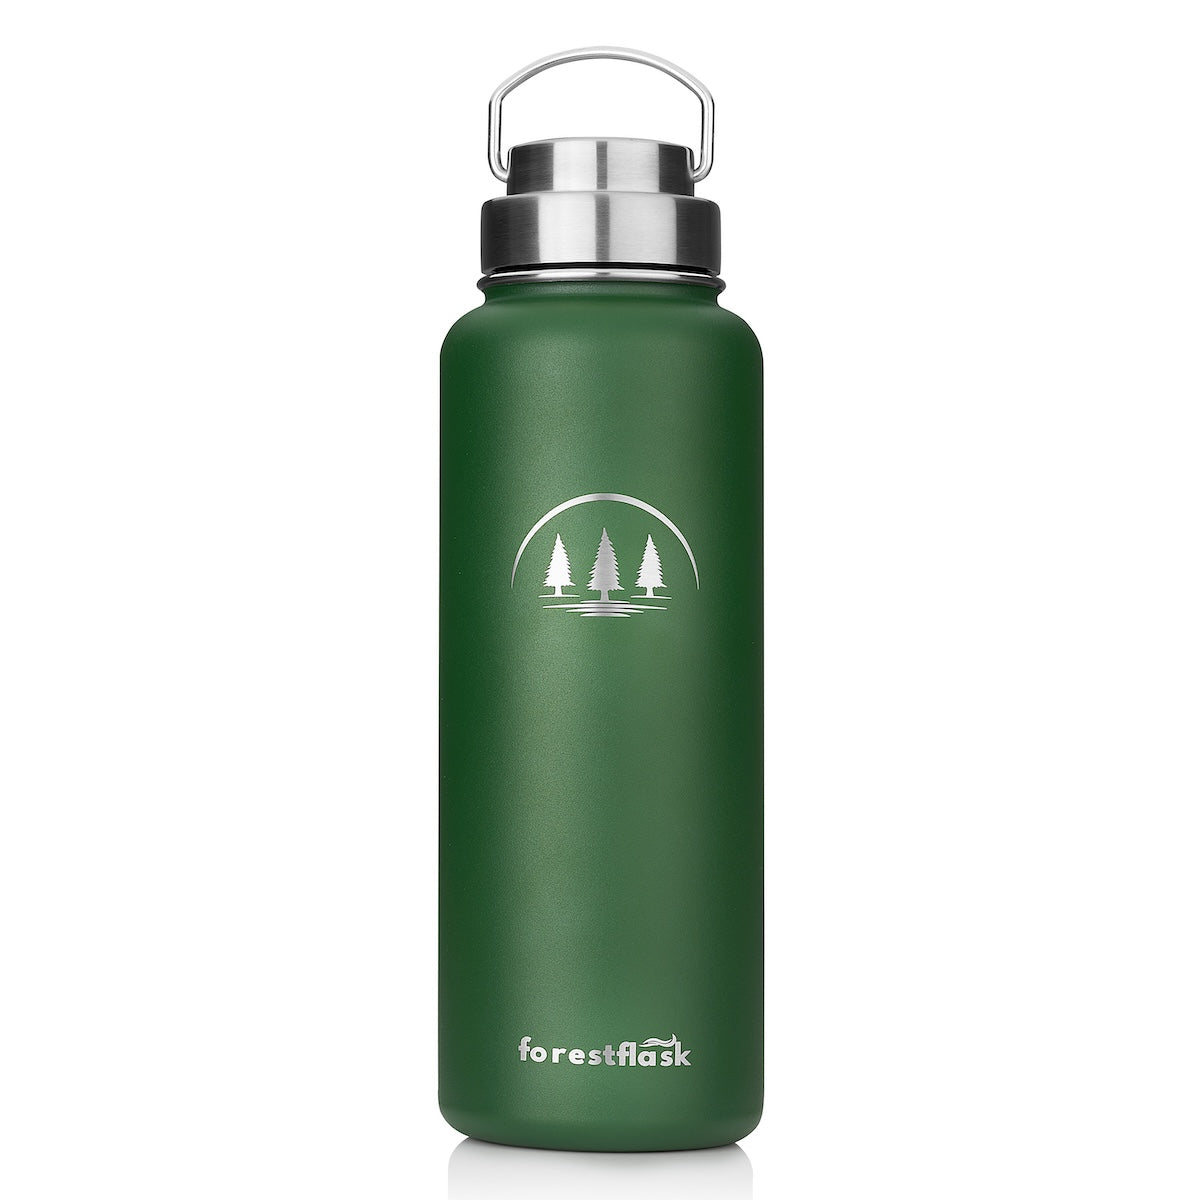 Forestflask 1.18 Litre in Forest Green